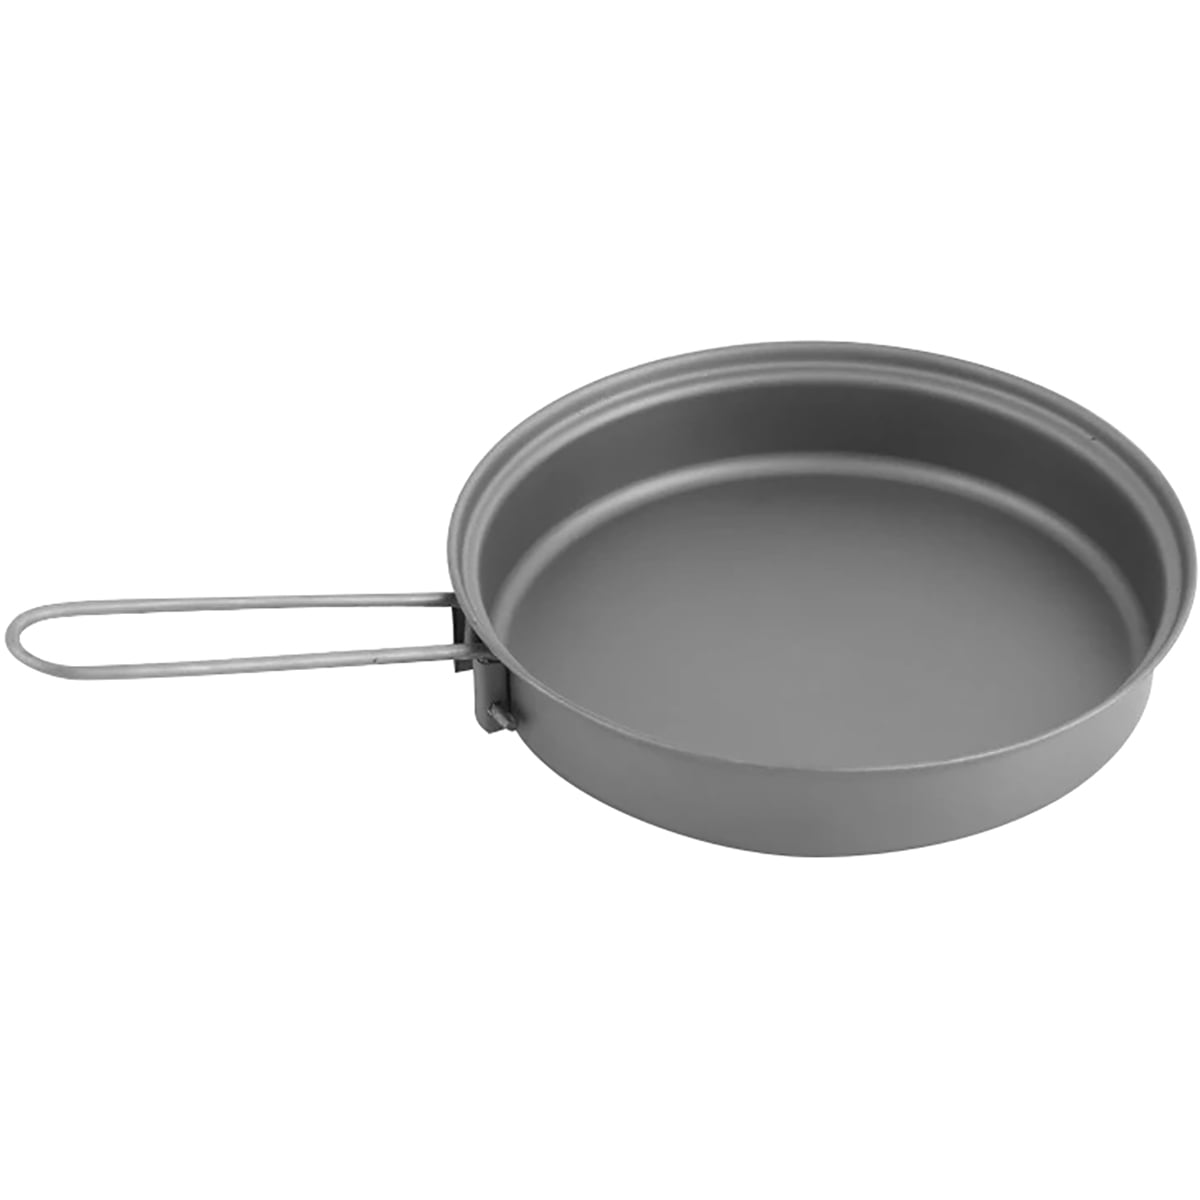 Outdoor Camping T3E9 Lightweight Titanium Frying Pan w/ Foldable Handle 33 5cm 